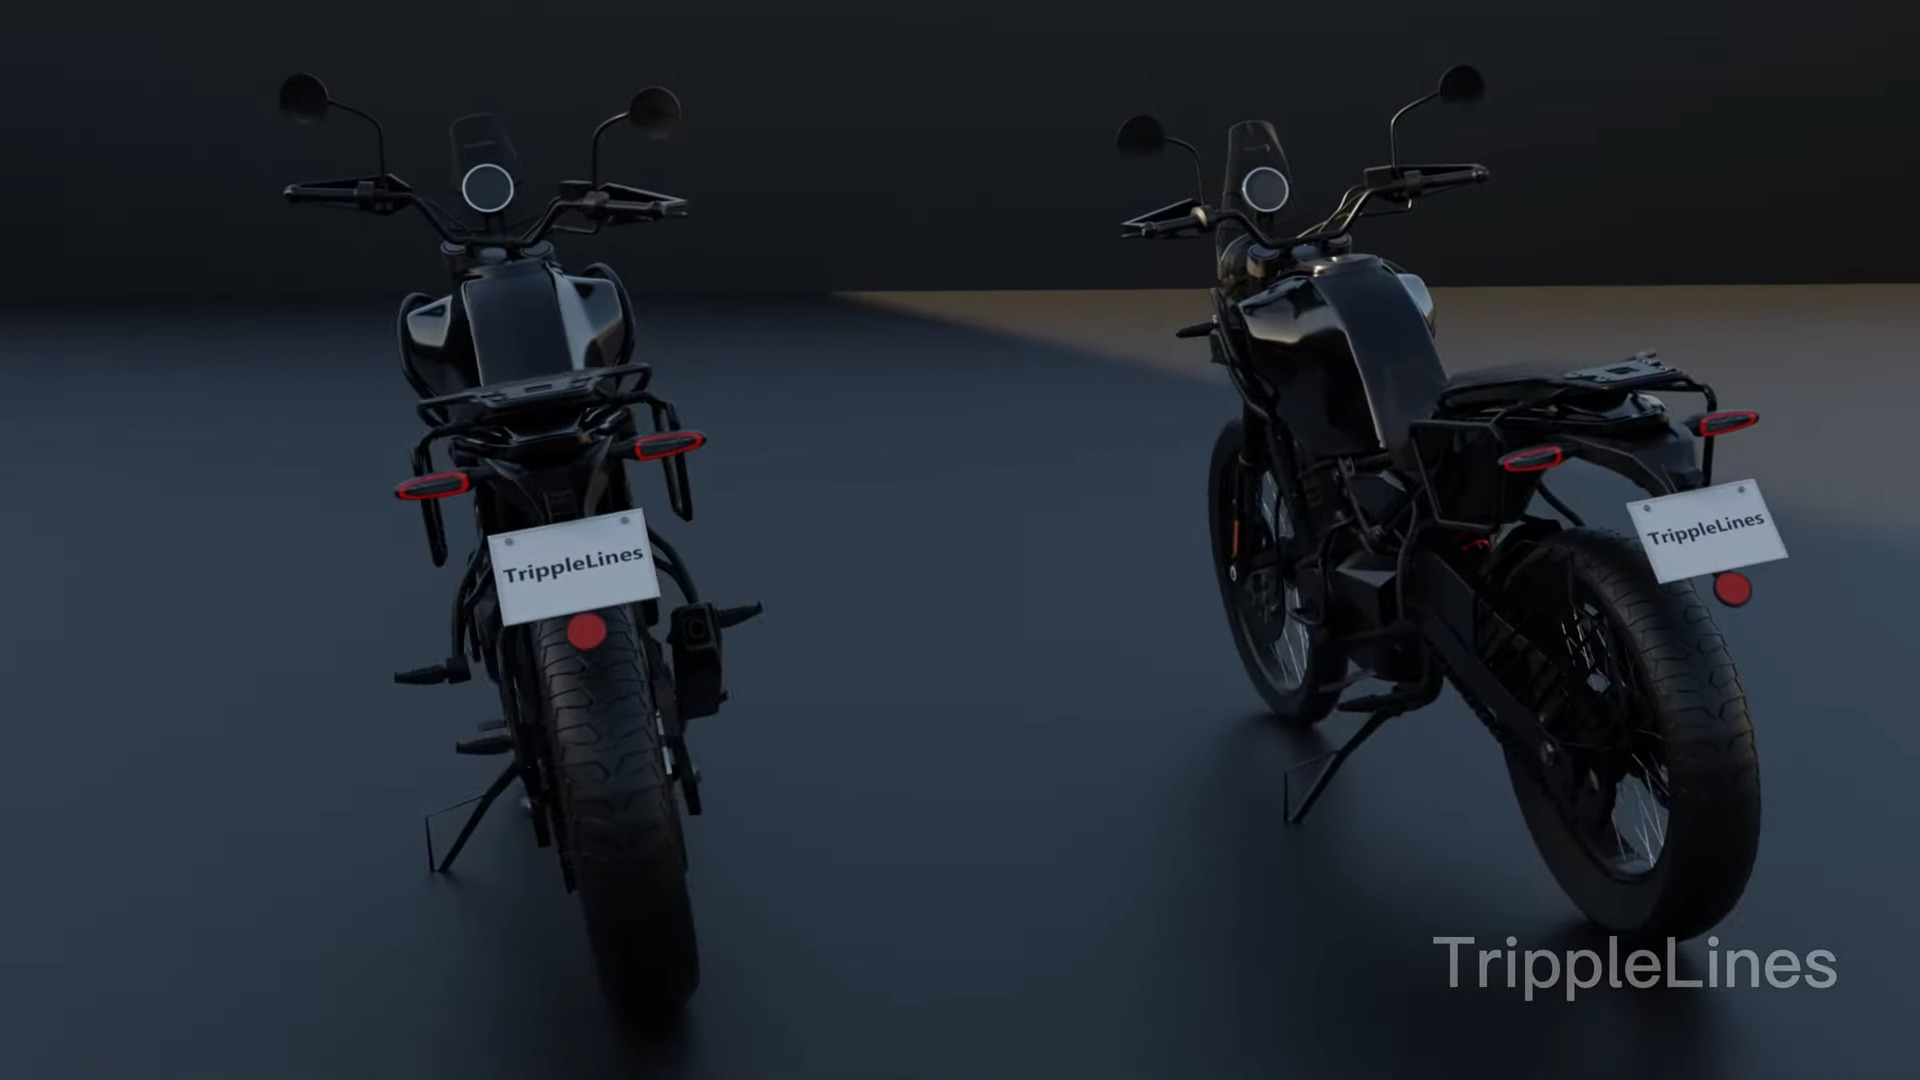 Royal Enfield Himalayan 450 Design Fully Revealed Via 3D Renderings - background